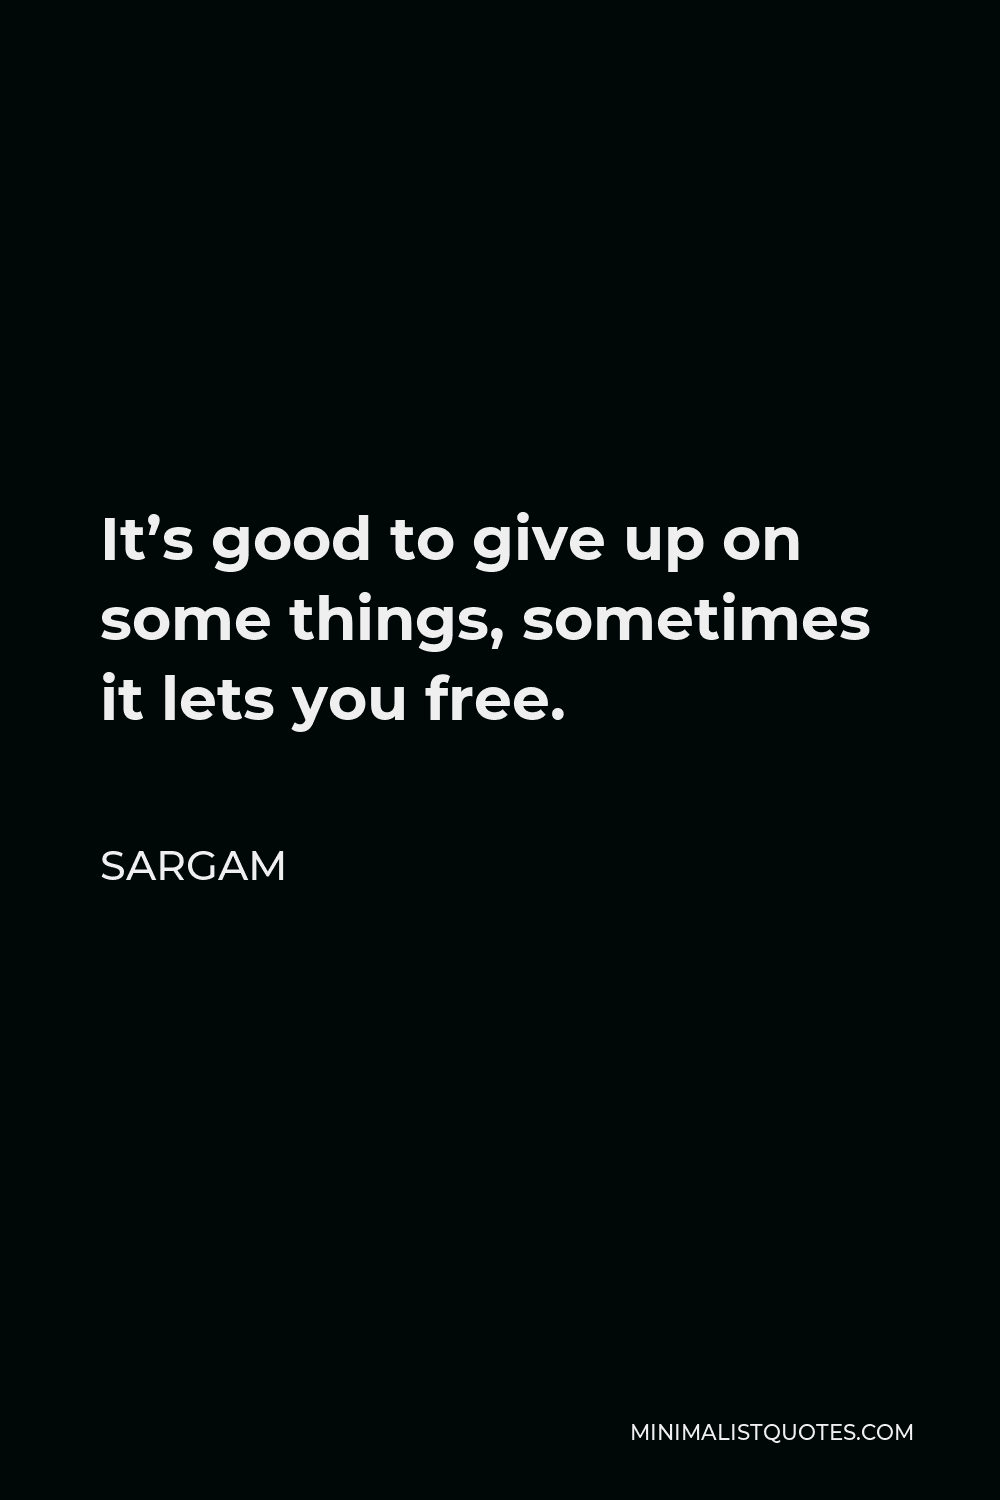 Sargam Quote - It’s good to give up on some things, sometimes it lets you free.